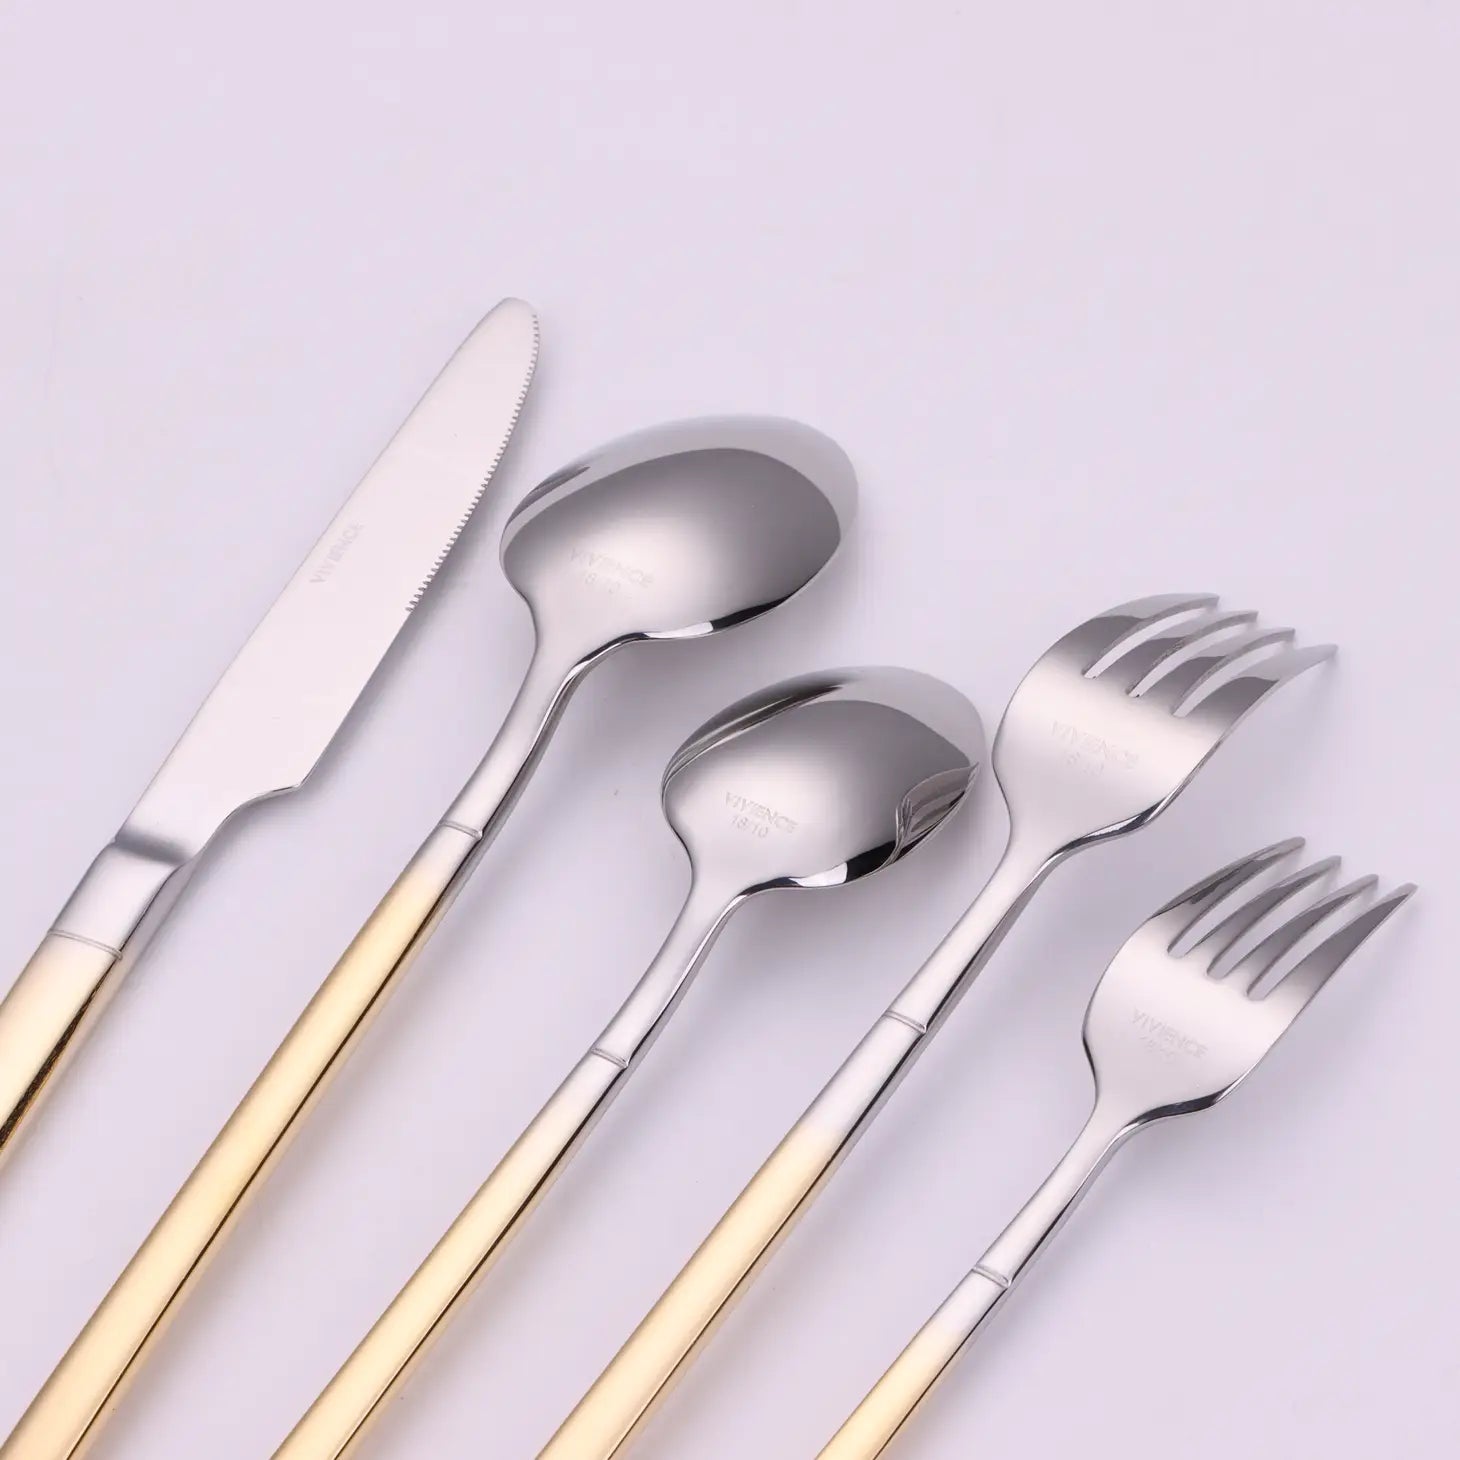 20 Pc Silver Flatware with Gold Handles, Service For 4 Cutlery High Class Touch - Home Decor 